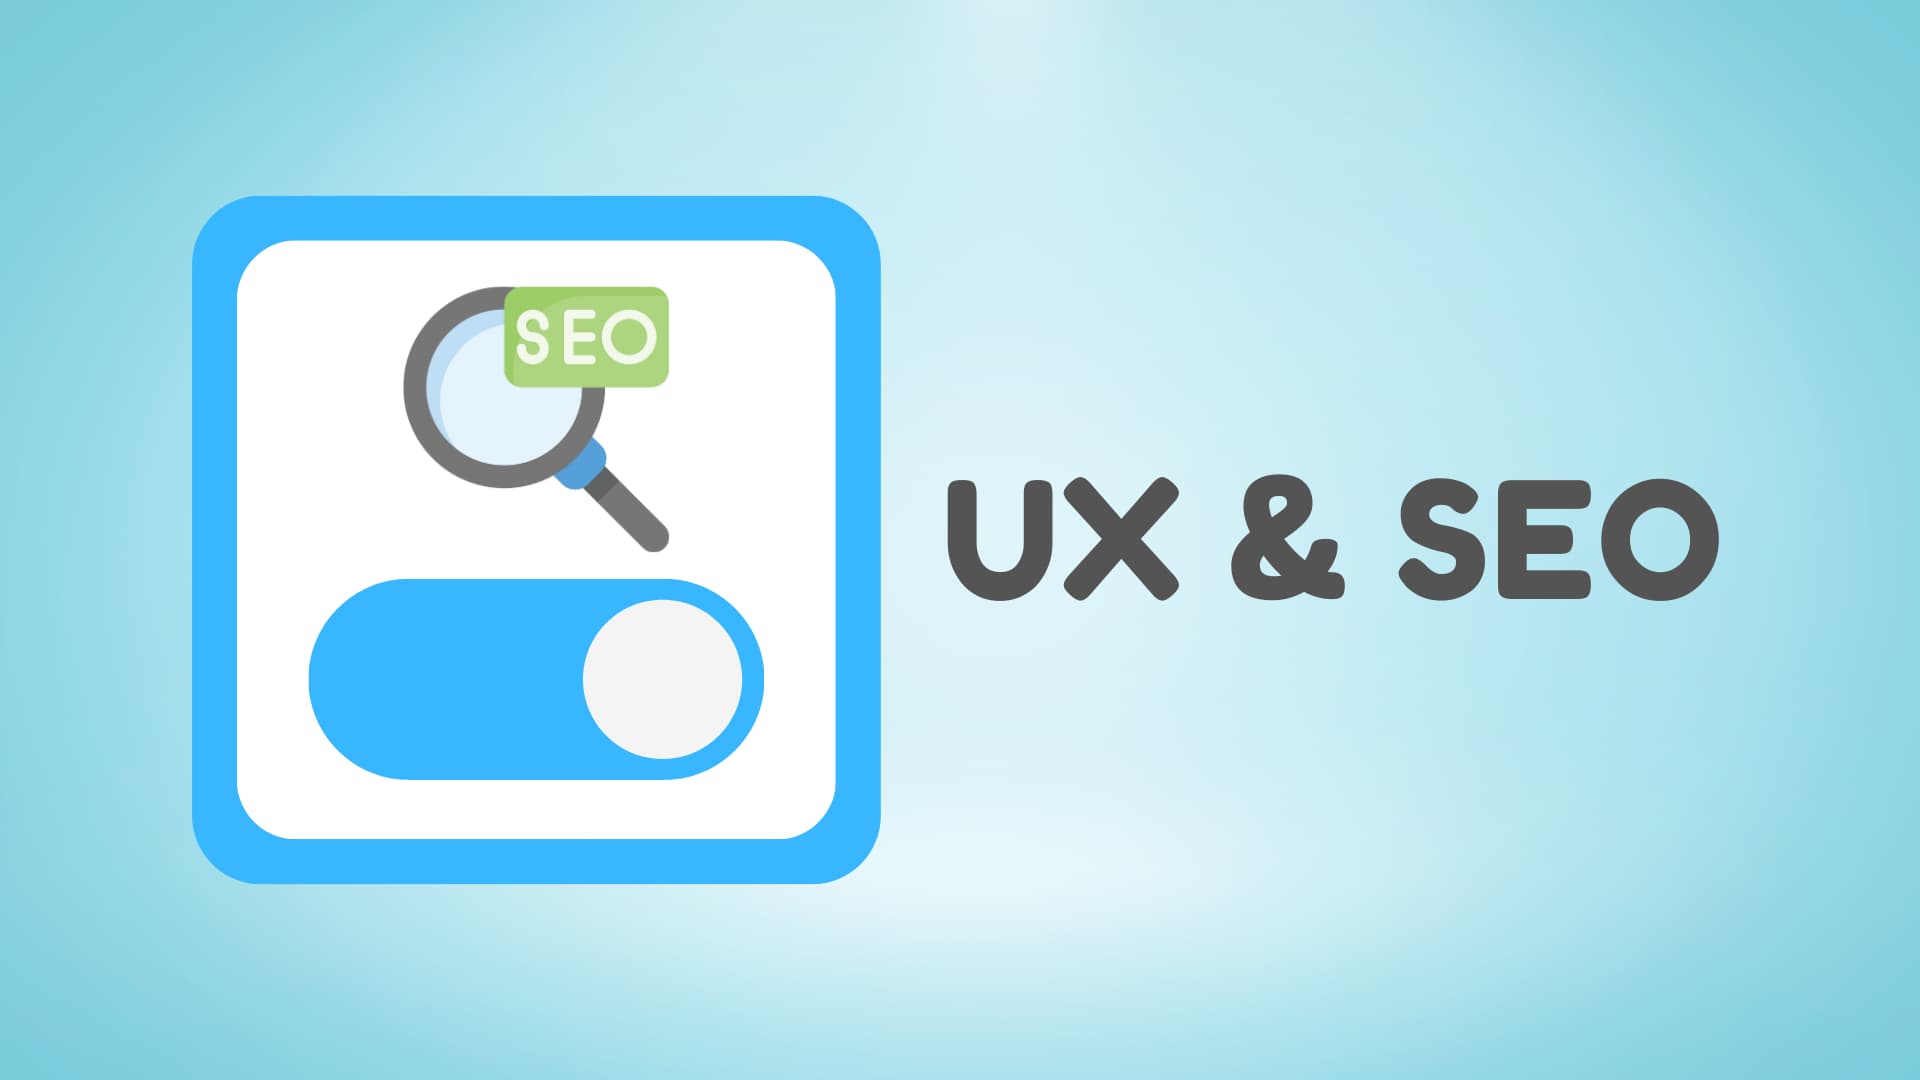 How to Optimize User Experience and SEO to Improve Your Ranking